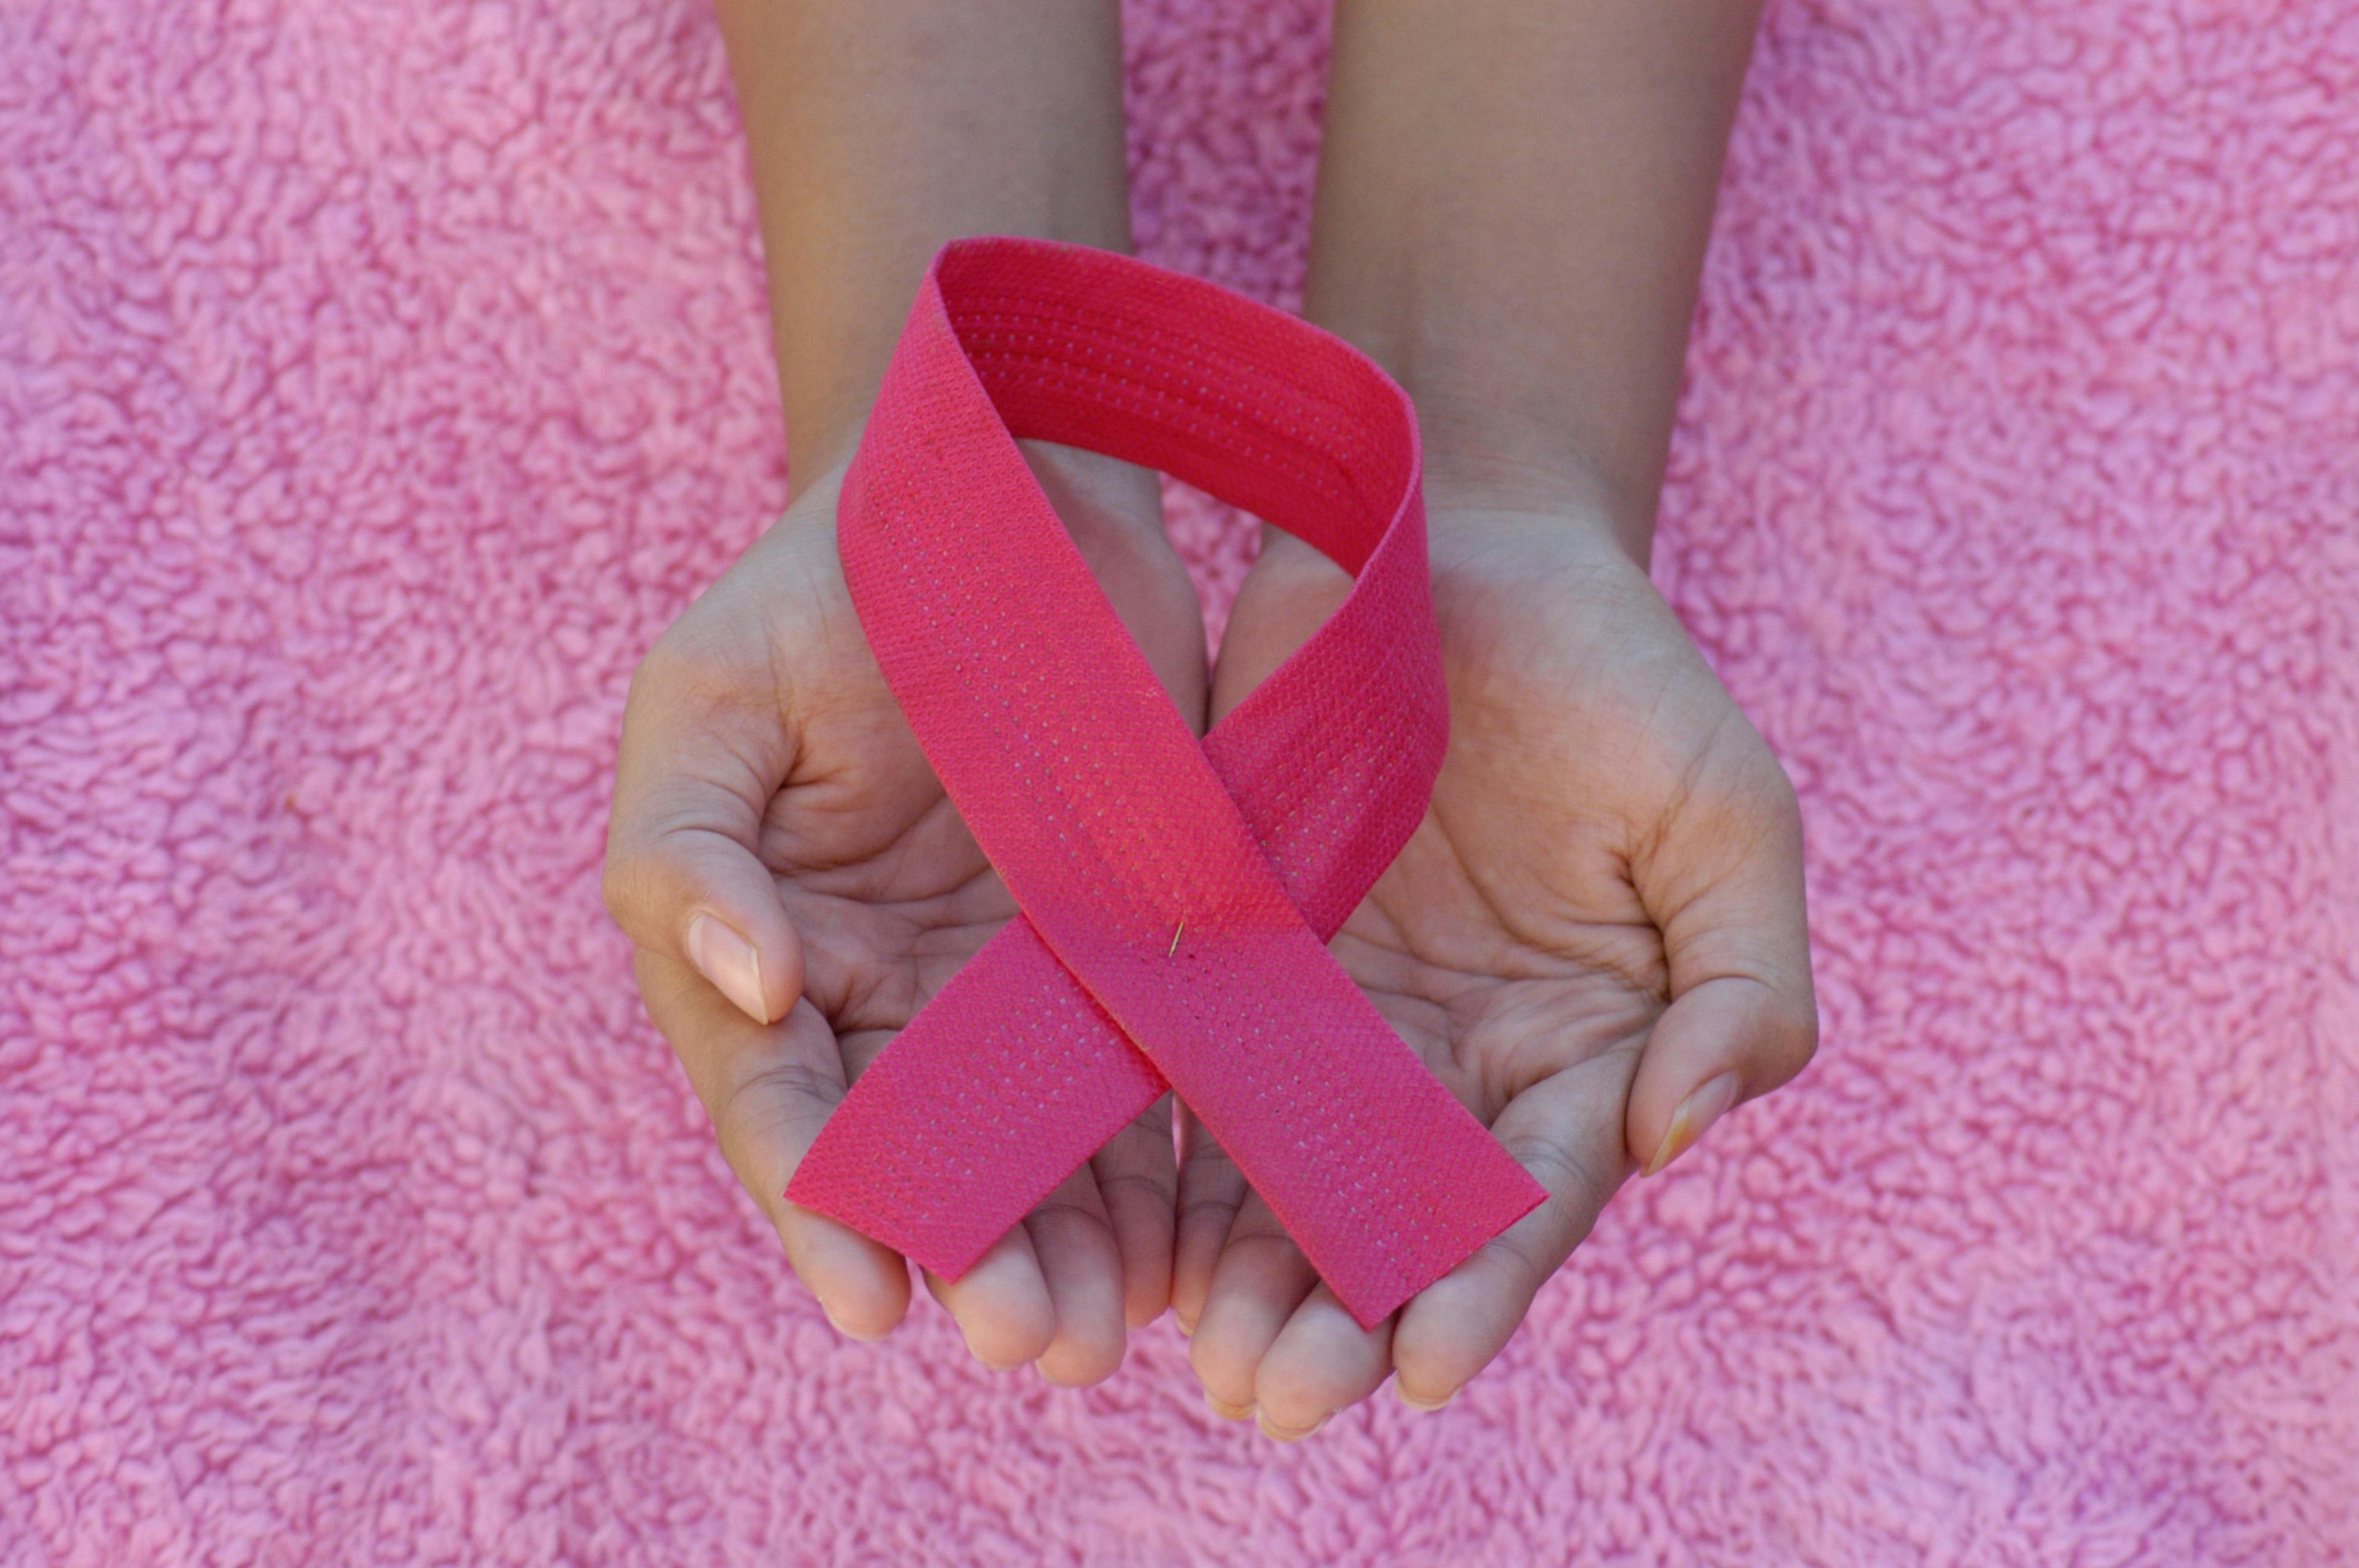 The 5 Most-Read Breast Cancer Articles of 2021